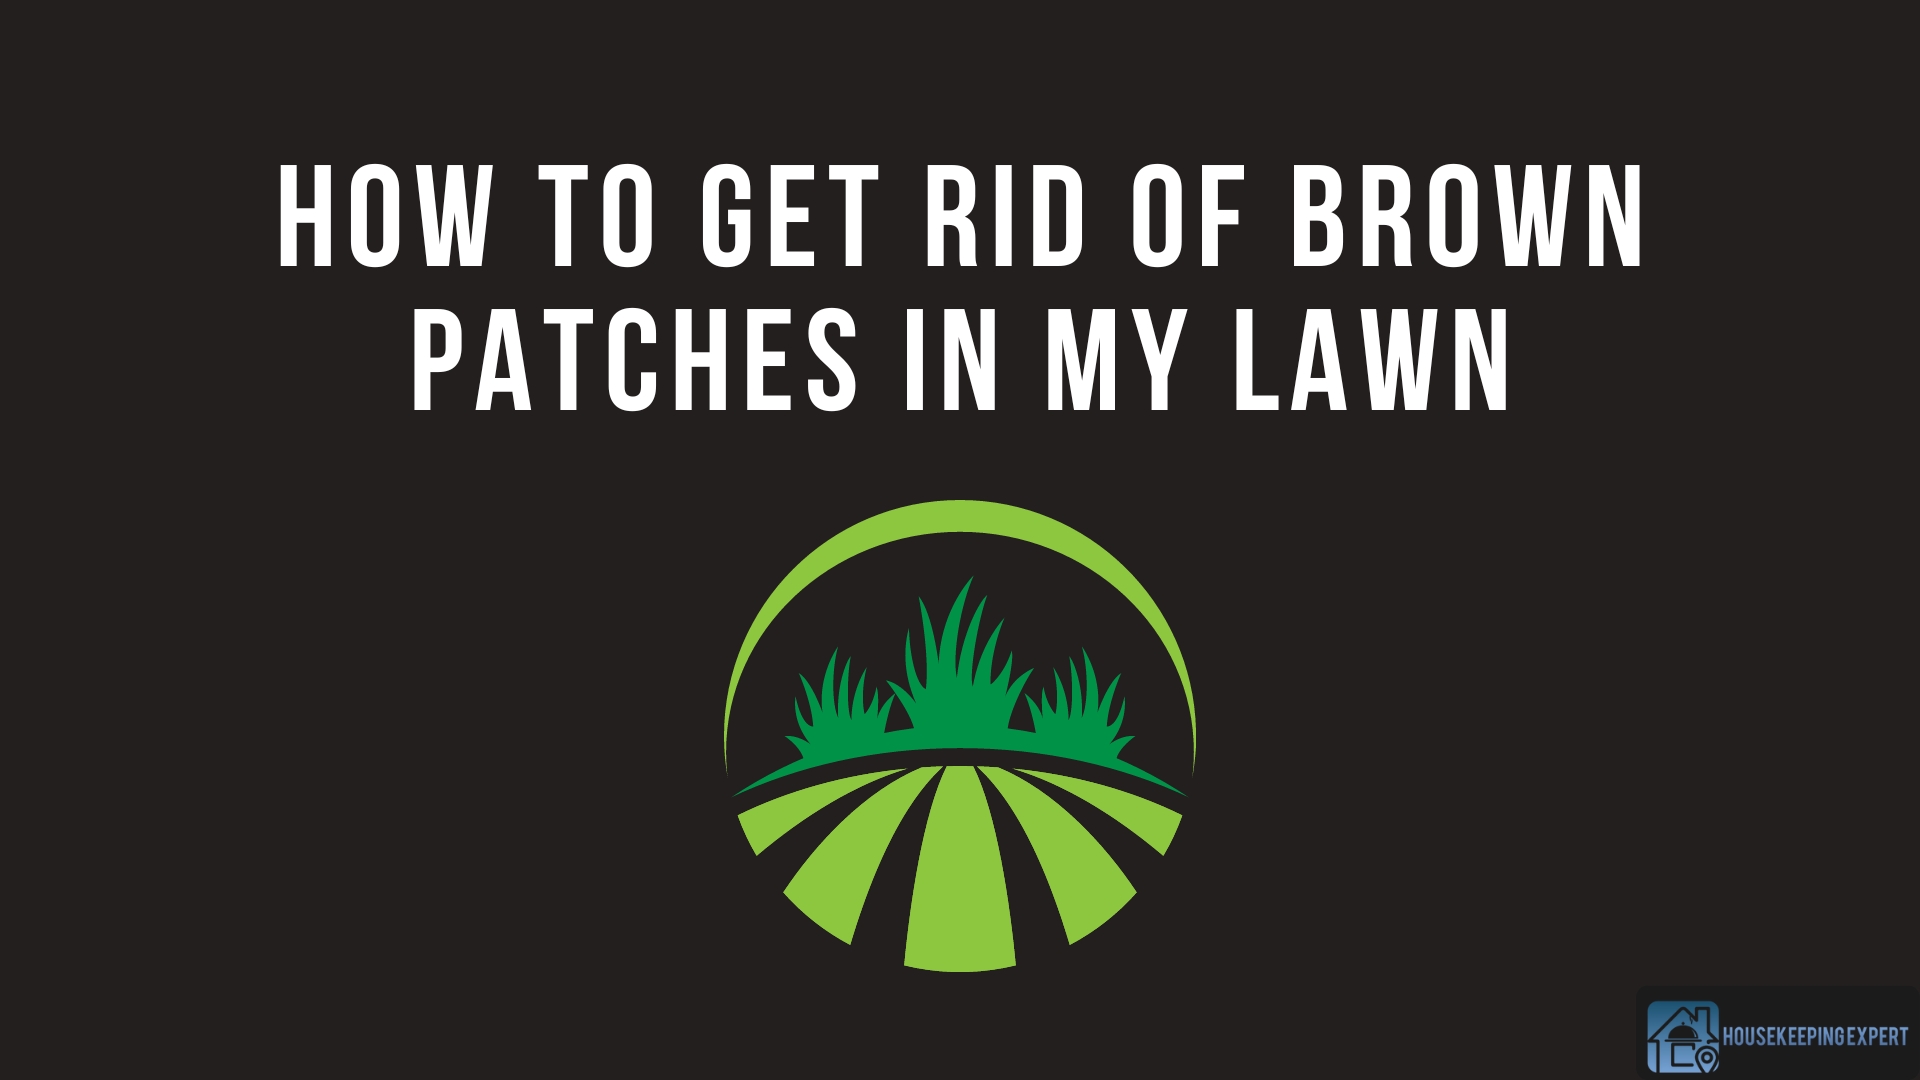 How To Get Rid Of Brown Patches In Your Lawn